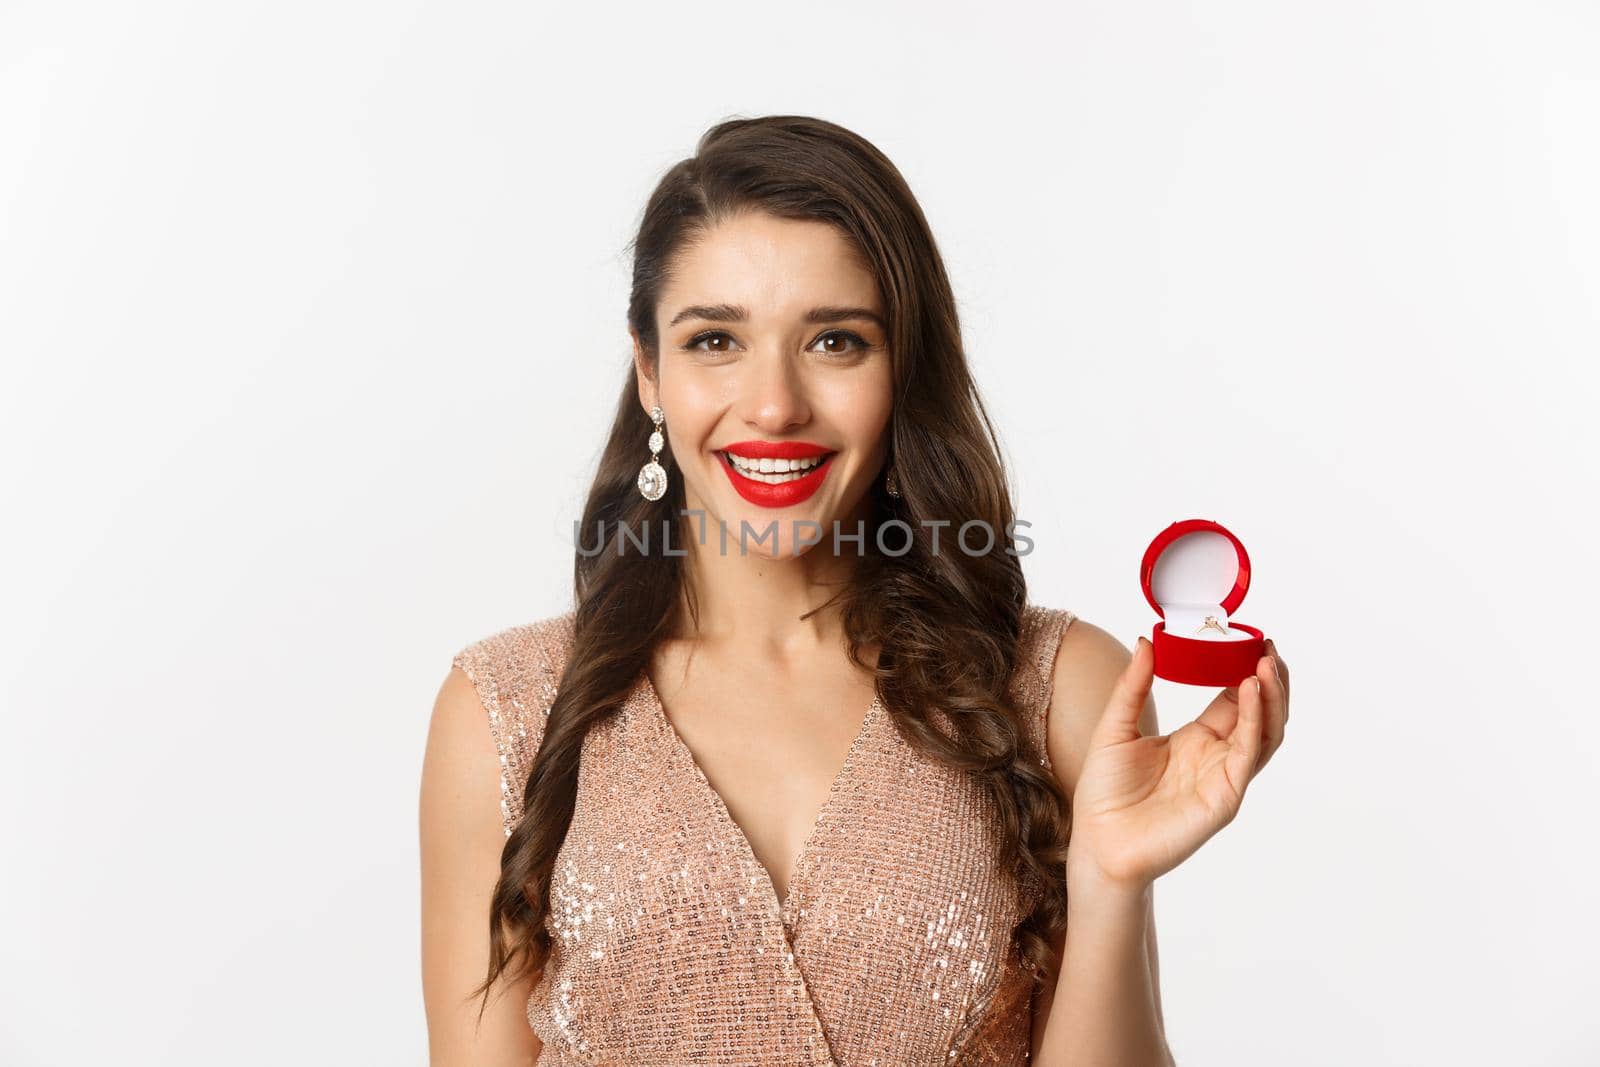 Close-up of beautiful brunette woman showing engagement ring, wearing elegant dress, receive marriage proposal, white background.